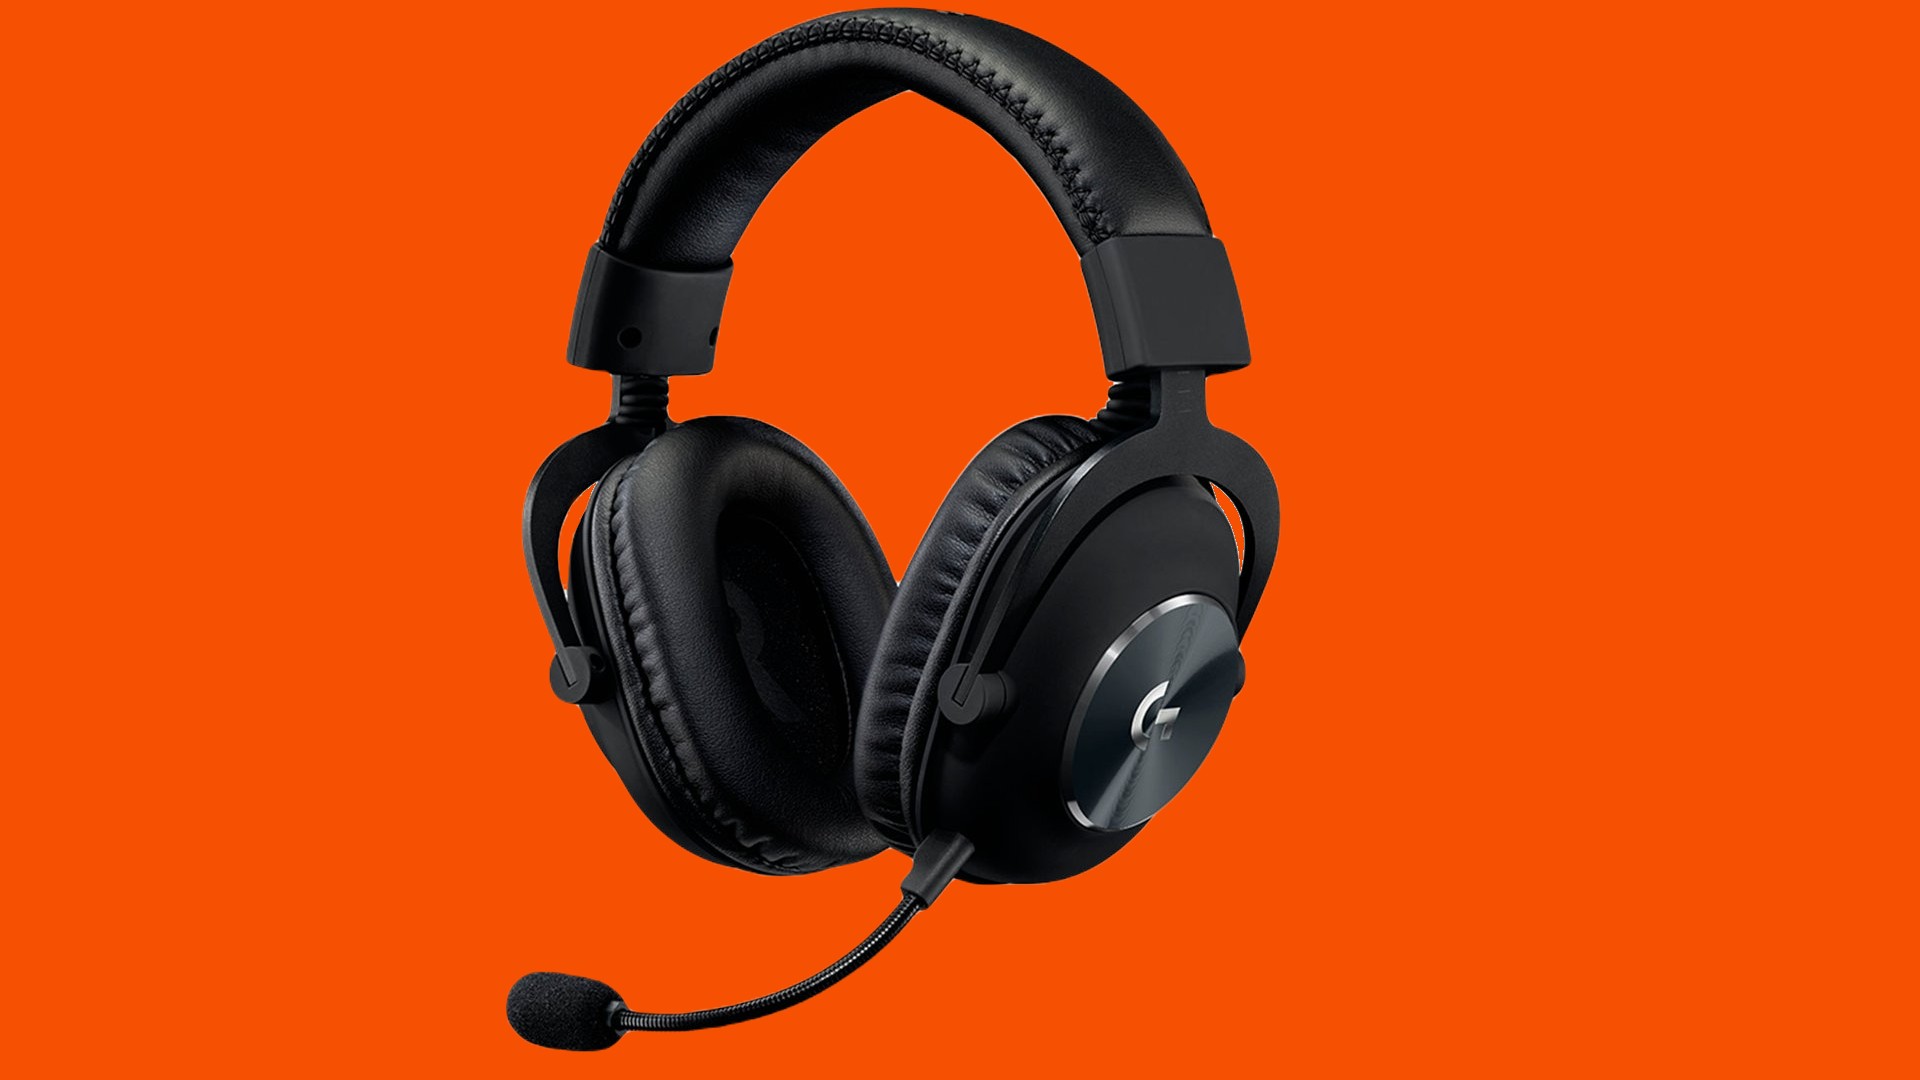 Save $110 in this astounding Logitech wireless gaming headset deal